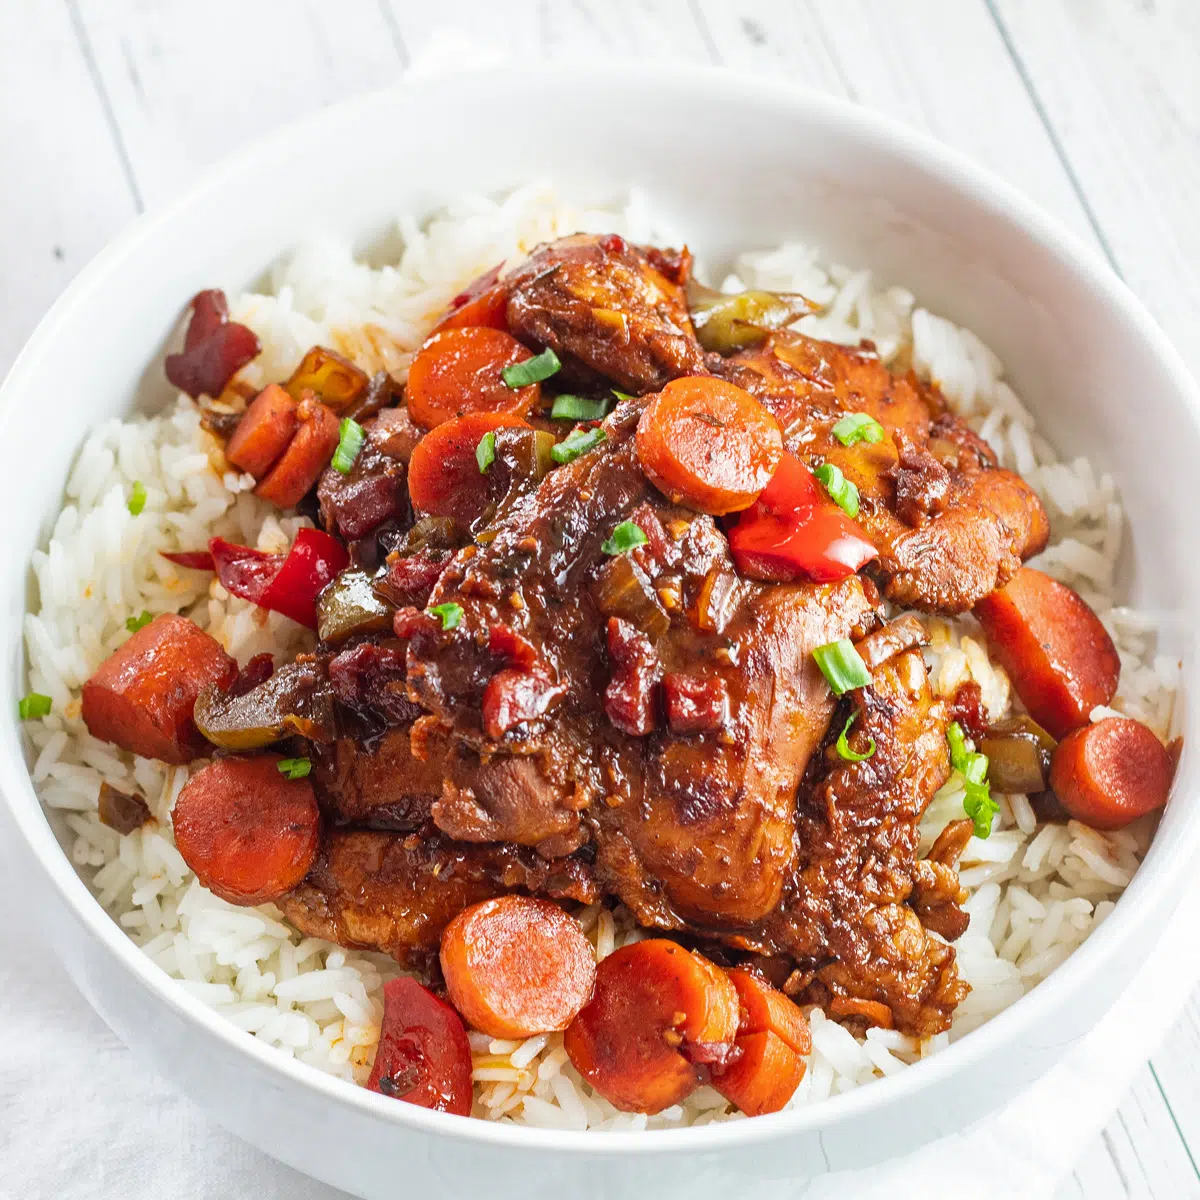 Rich and flavorful brown stew chicken served over rice in white bowl.